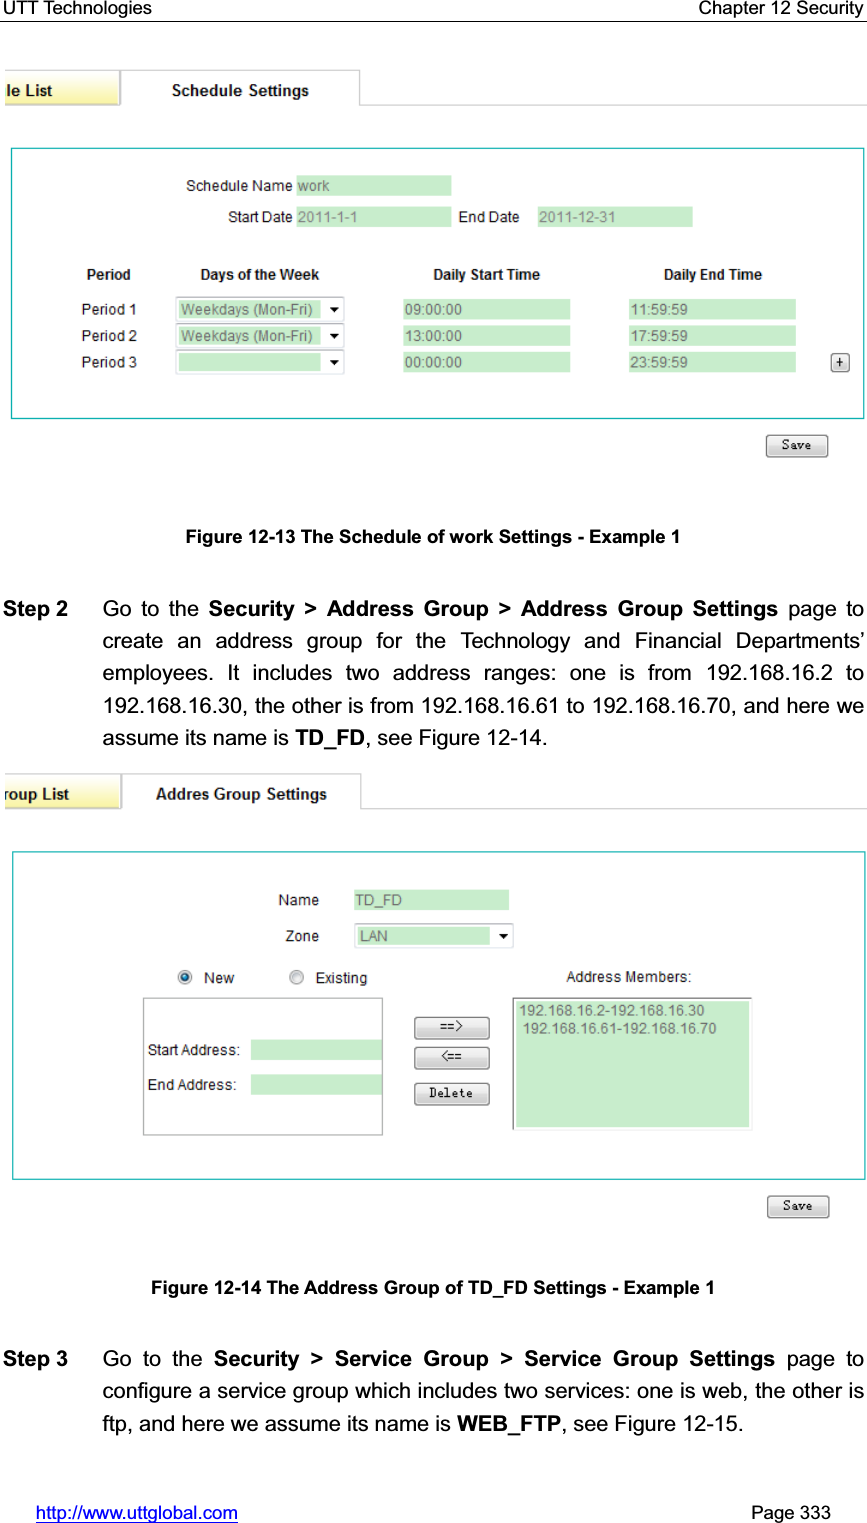 UTT Technologies    Chapter 12 Security   http://www.uttglobal.com                                                       Page 333 Figure 12-13 The Schedule of work Settings - Example 1 Step 2  Go to the Security &gt; Address Group &gt; Address Group Settings page to create an address group for the Technology and Financial Departments¶employees. It includes two address ranges: one is from 192.168.16.2 to 192.168.16.30, the other is from 192.168.16.61 to 192.168.16.70, and here we assume its name is TD_FD, see Figure 12-14.     Figure 12-14 The Address Group of TD_FD Settings - Example 1Step 3  Go to the Security &gt; Service Group &gt; Service Group Settings page to configure a service group which includes two services: one is web, the other is ftp, and here we assume its name is WEB_FTP, see Figure 12-15.     